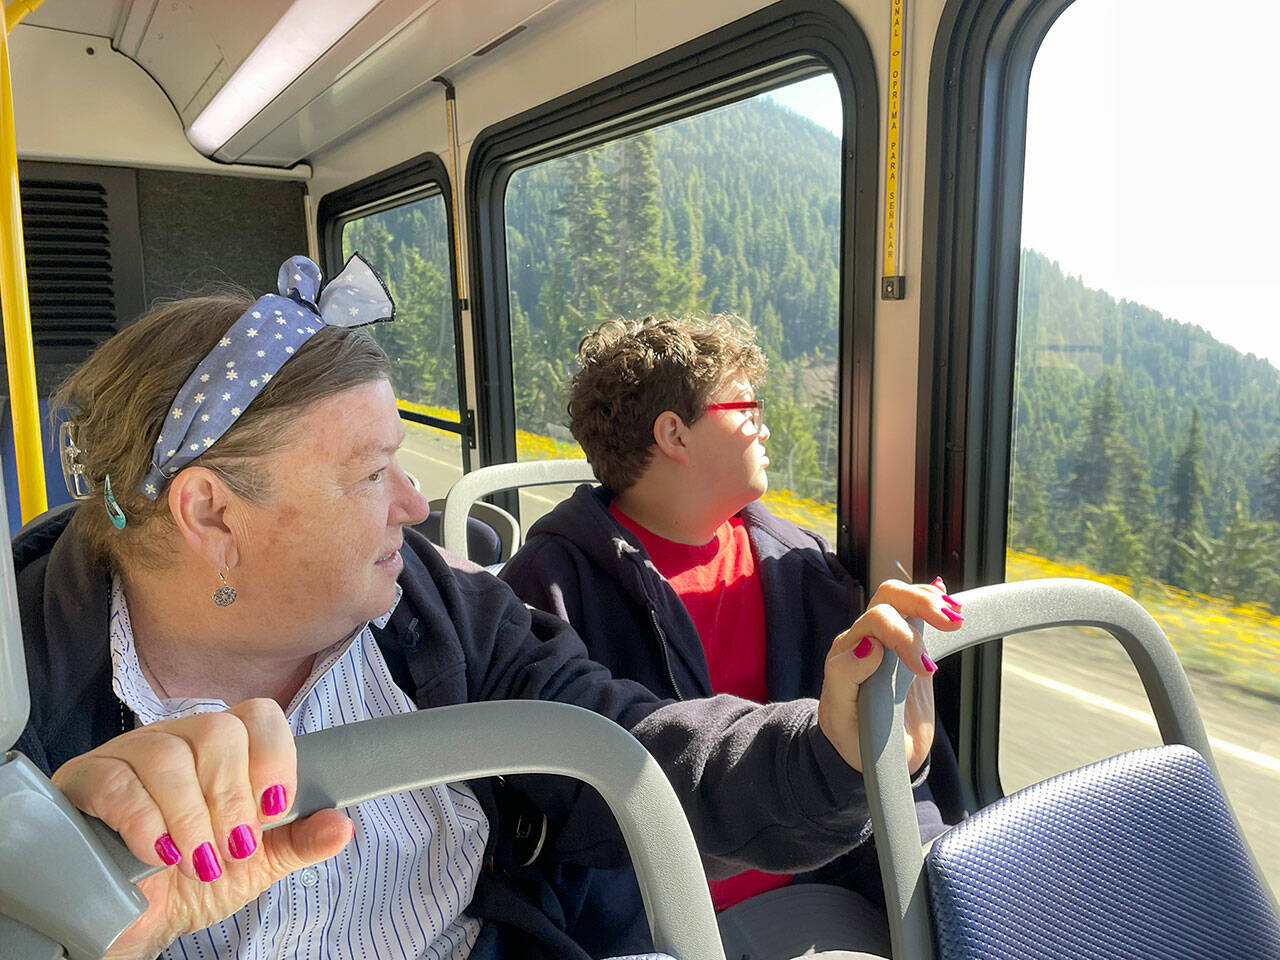 Jeannie Thompson, left, of Livonia, Mich., has visited Hurricane Ridge many times over the years, but says she loves the idea of taking the shuttle rather than driving. This was her 14-year-old grandson Sherman Thompson’s first trip to Port Angeles and Hurricane Ridge. (Paula Hunt/Peninsula Daily News)